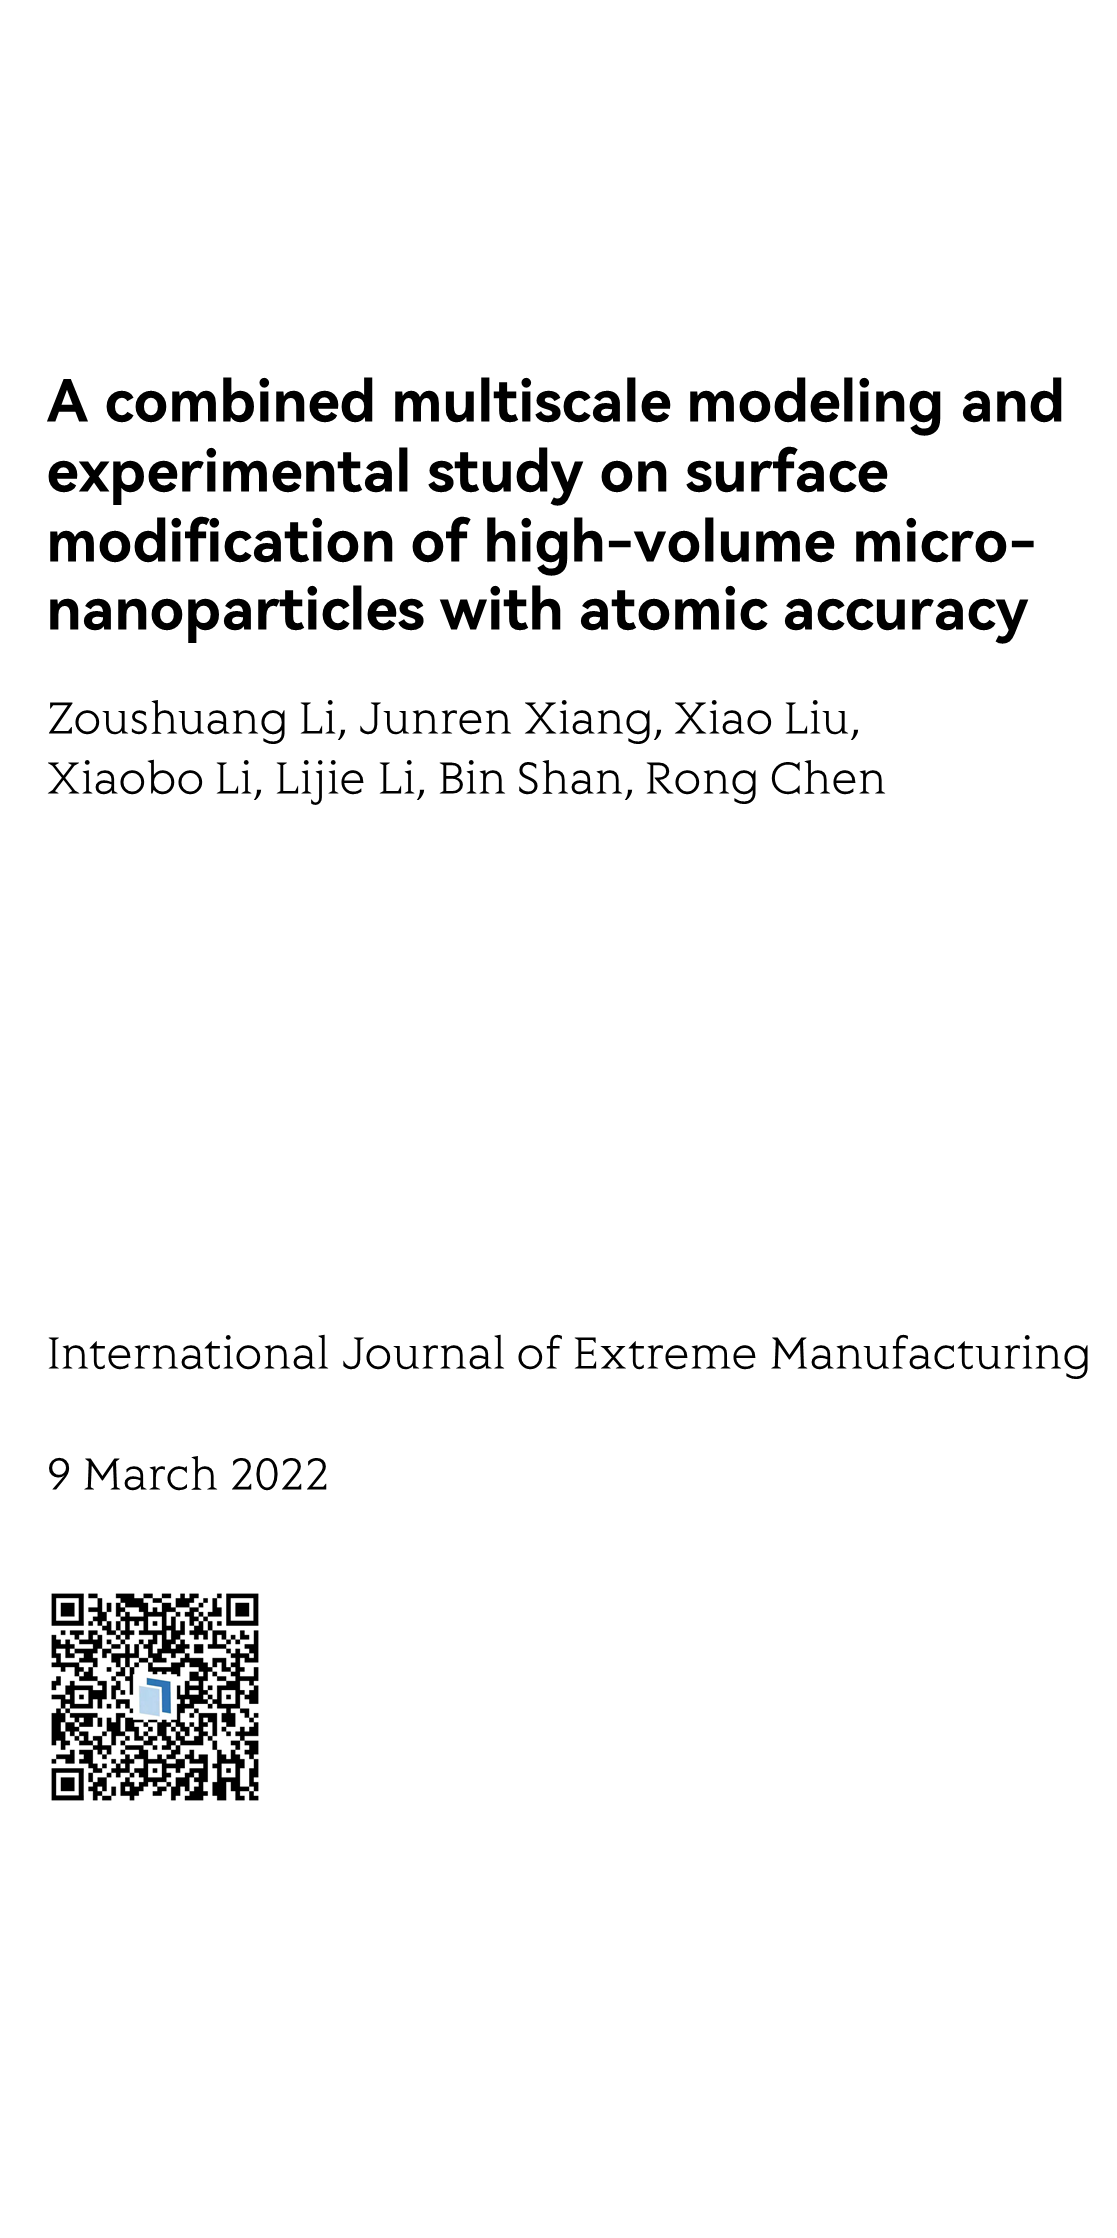 A combined multiscale modeling and experimental study on surface modification of high-volume micro-nanoparticles with atomic accuracy_1